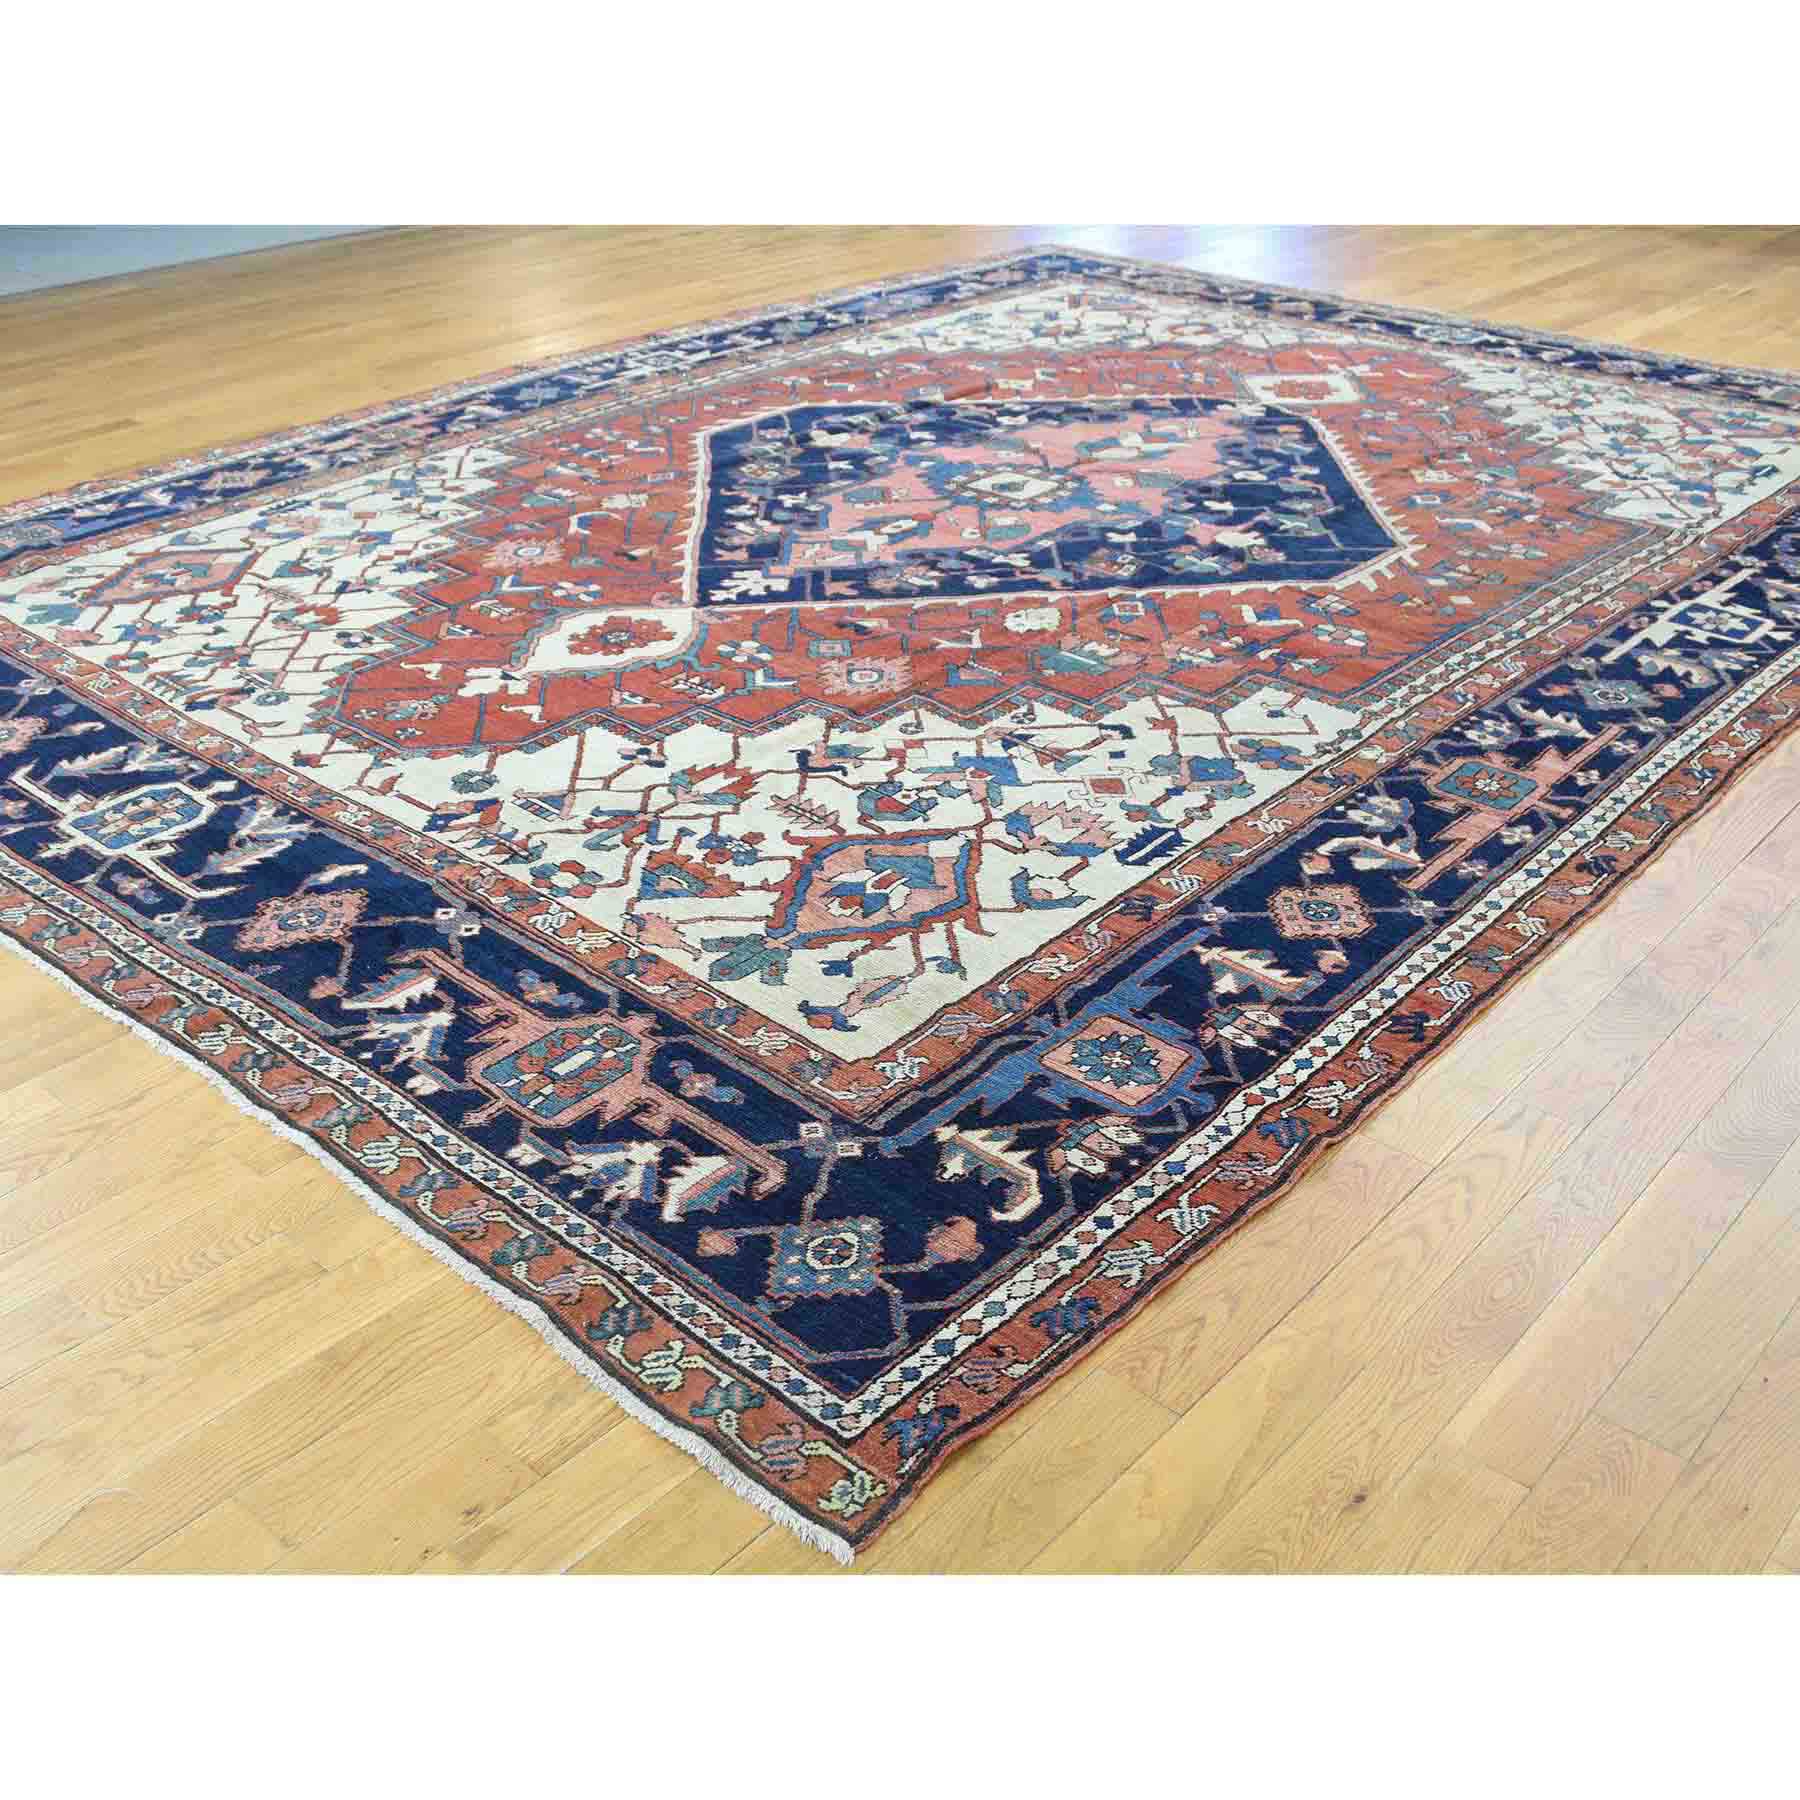 Antique-Hand-Knotted-Rug-177165